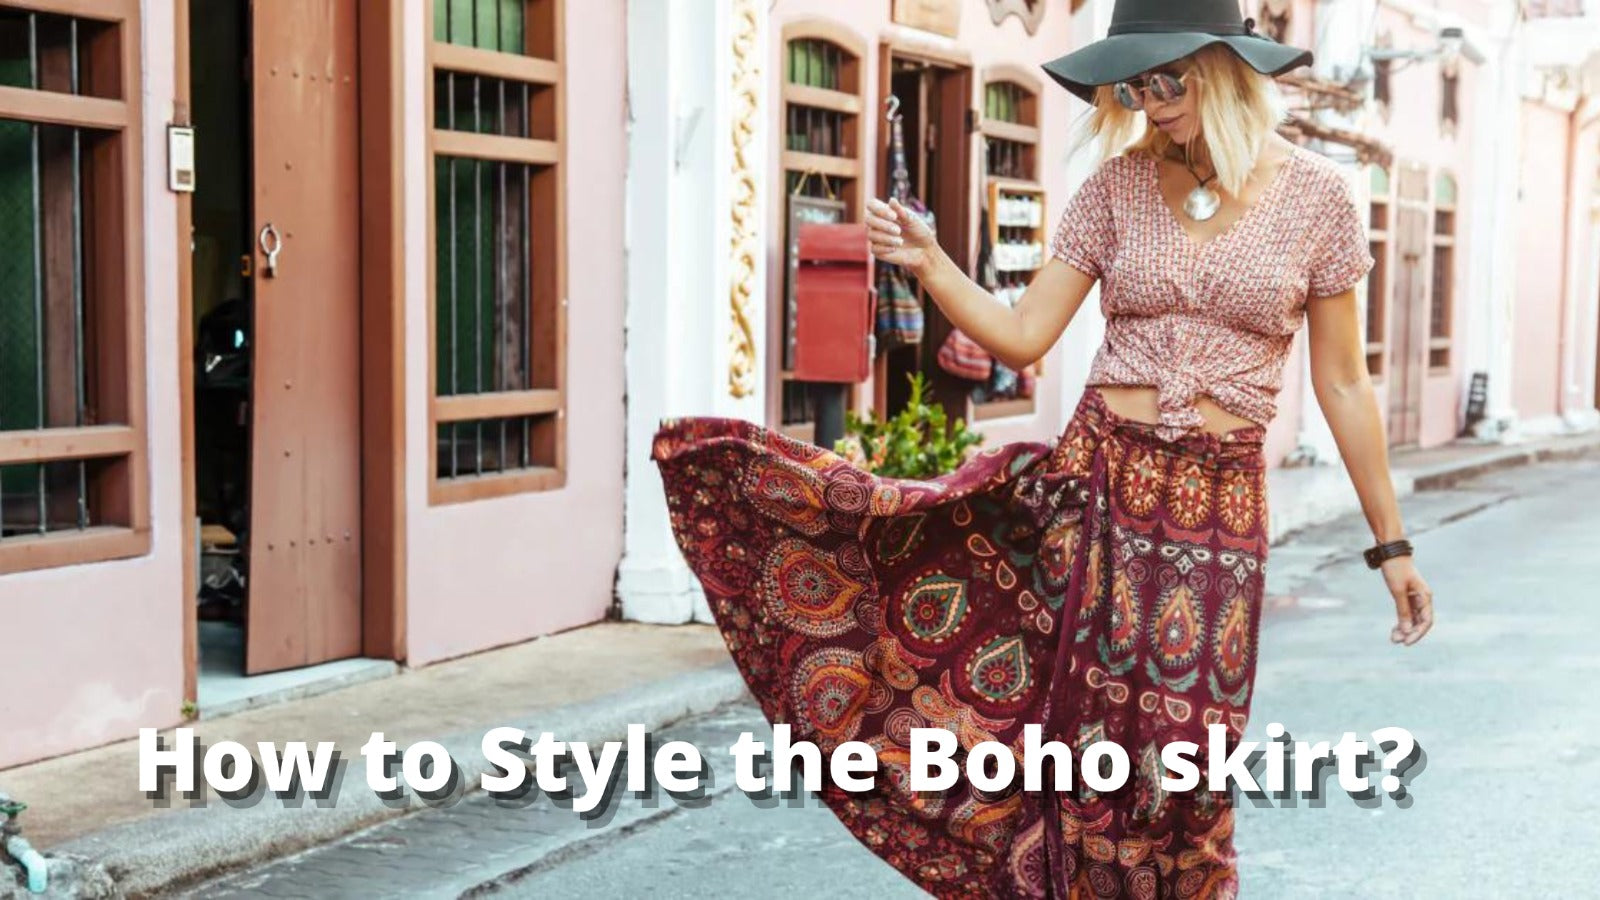 How to style the Boho skirt?